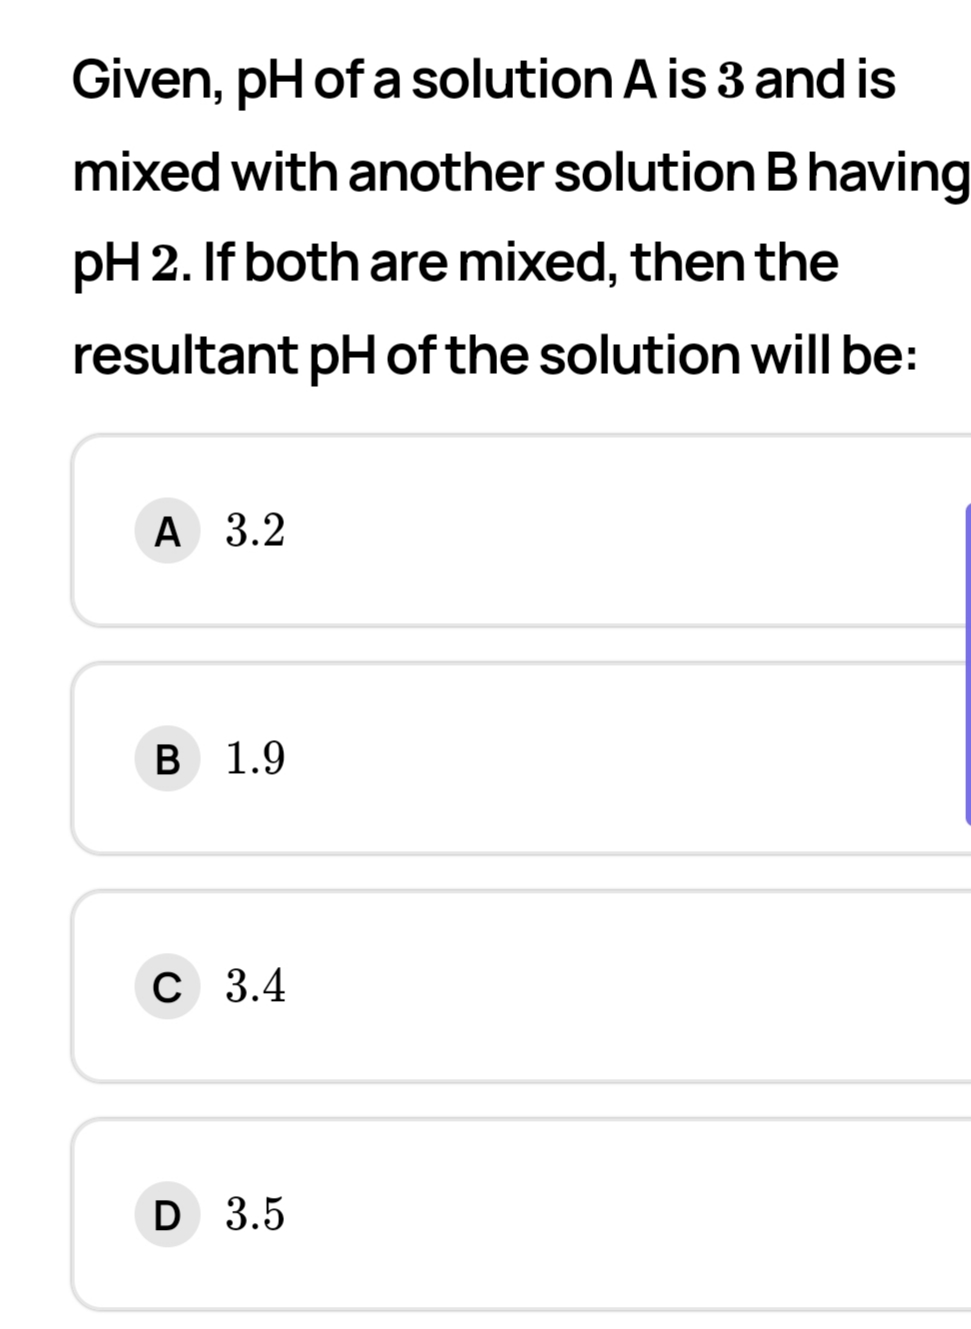 Given, pH of a solution A is 3 and is
mixed with another solution Bhaving
pH 2. If both are mixed, then the
resultant pH of the solution will be:
A 3.2
B 1.9
C 3.4
D 3.5
